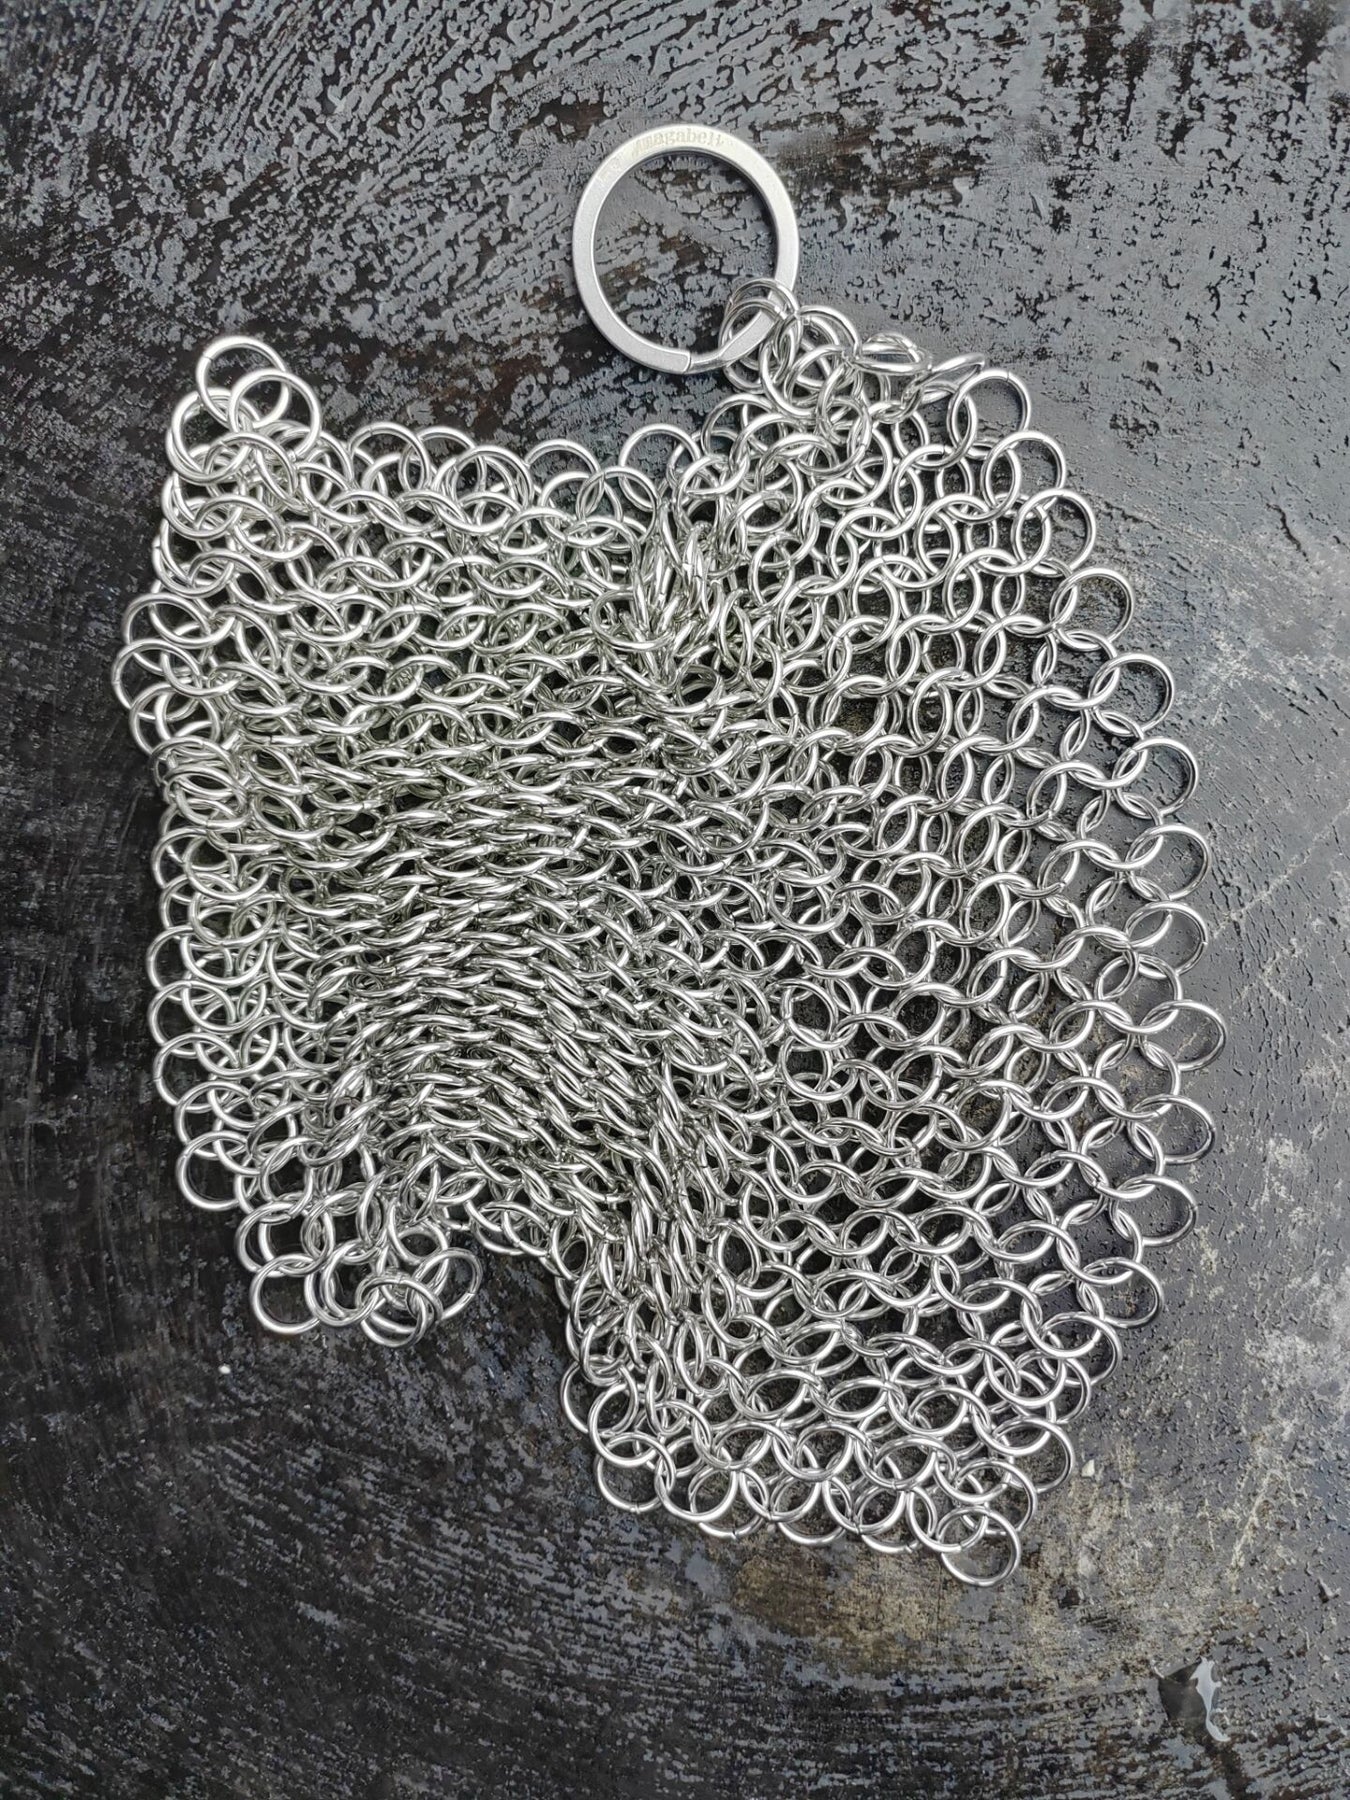 Petromax - Chain Mail Cleaner XL for Cast and Wrought Iron